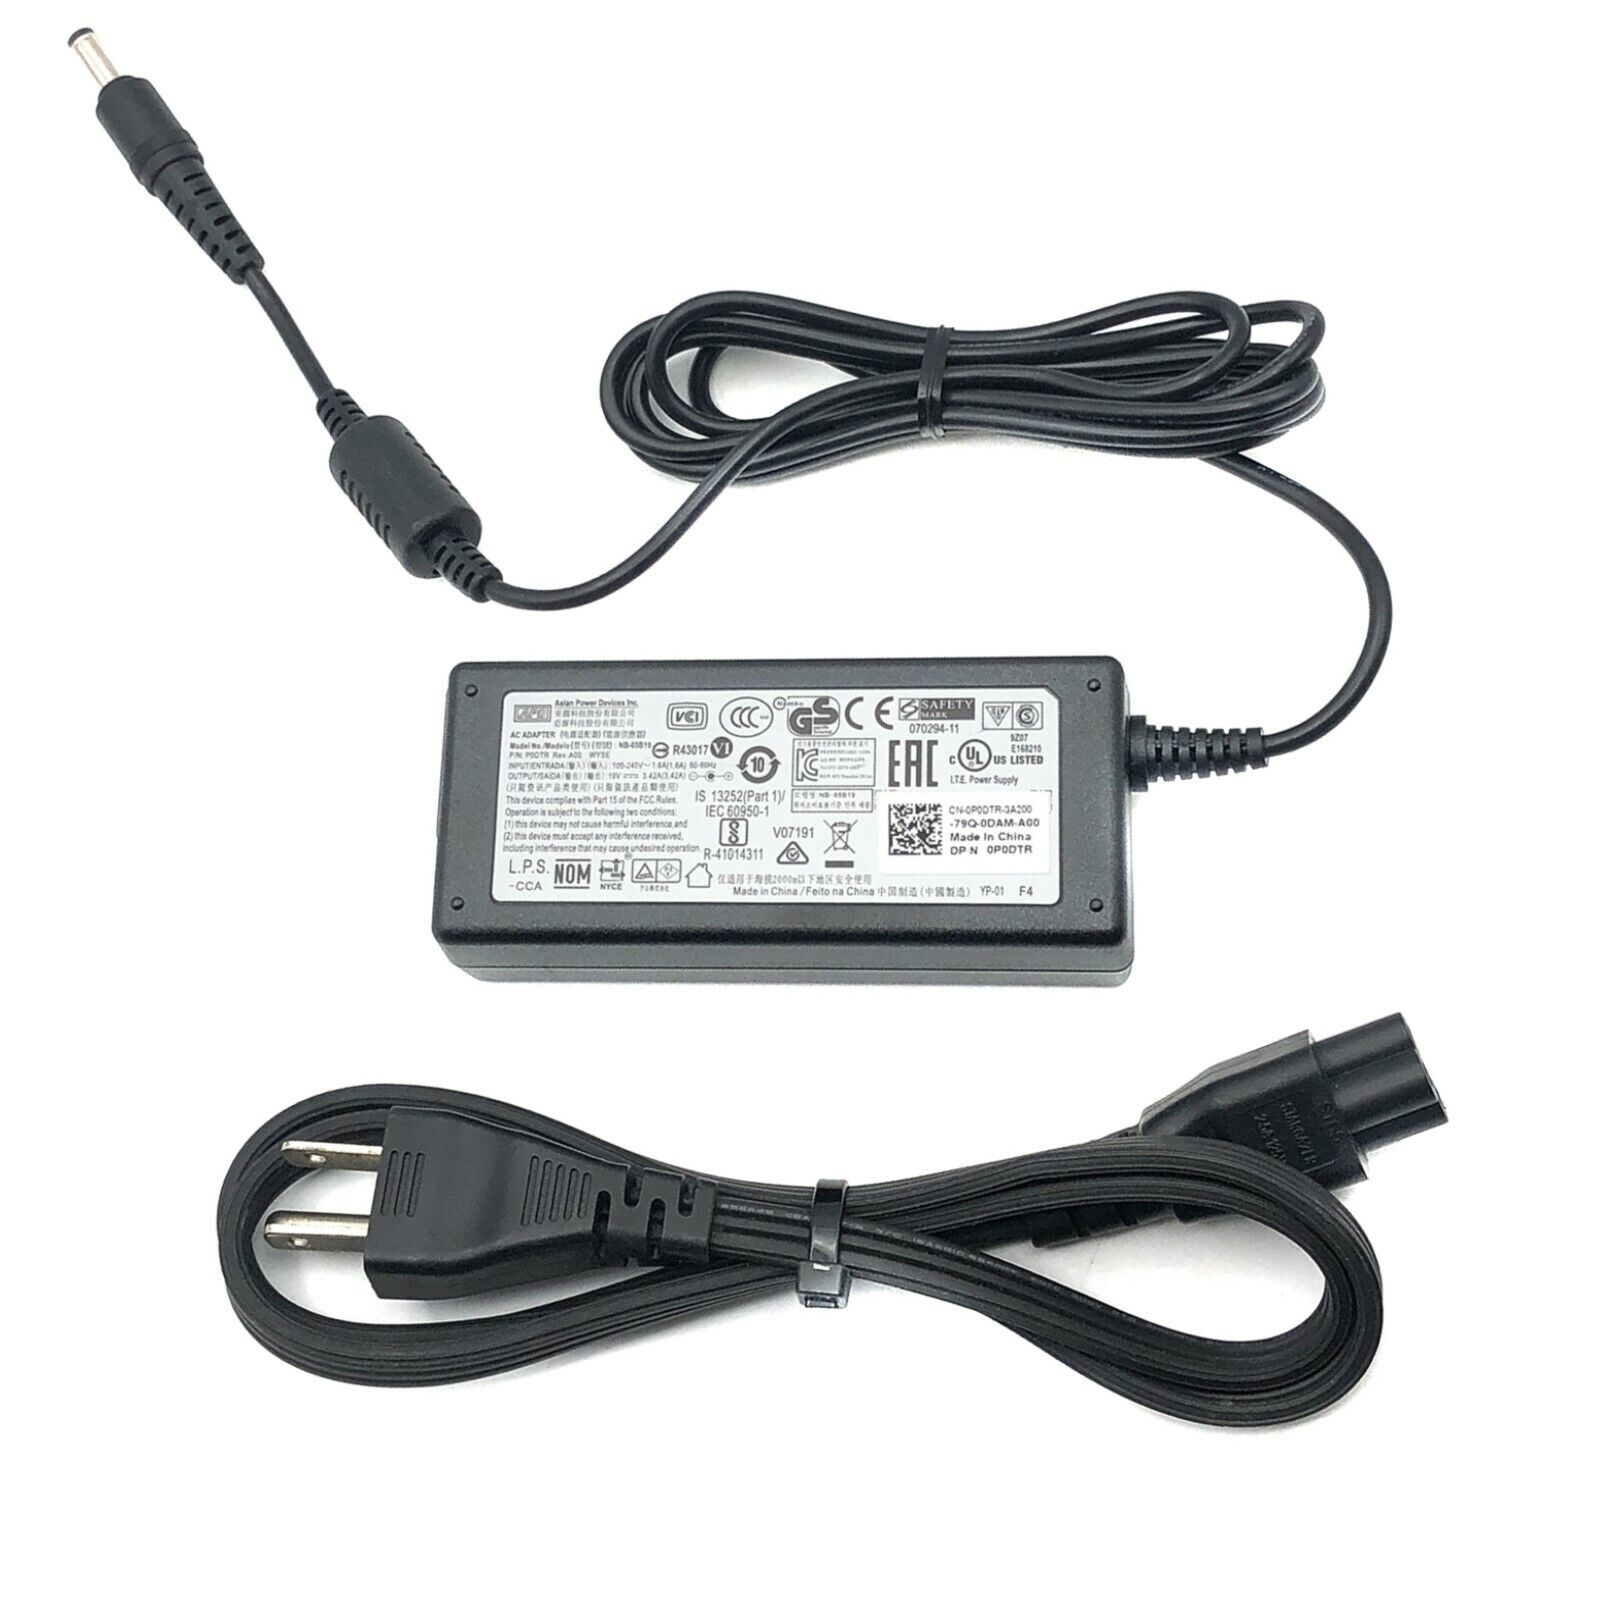 *Brand NEW* Genuine APD for Asus NB-65B19 UL80V UX50V U80A W3 19V 3.42A 65W AC Adapter Charger Power